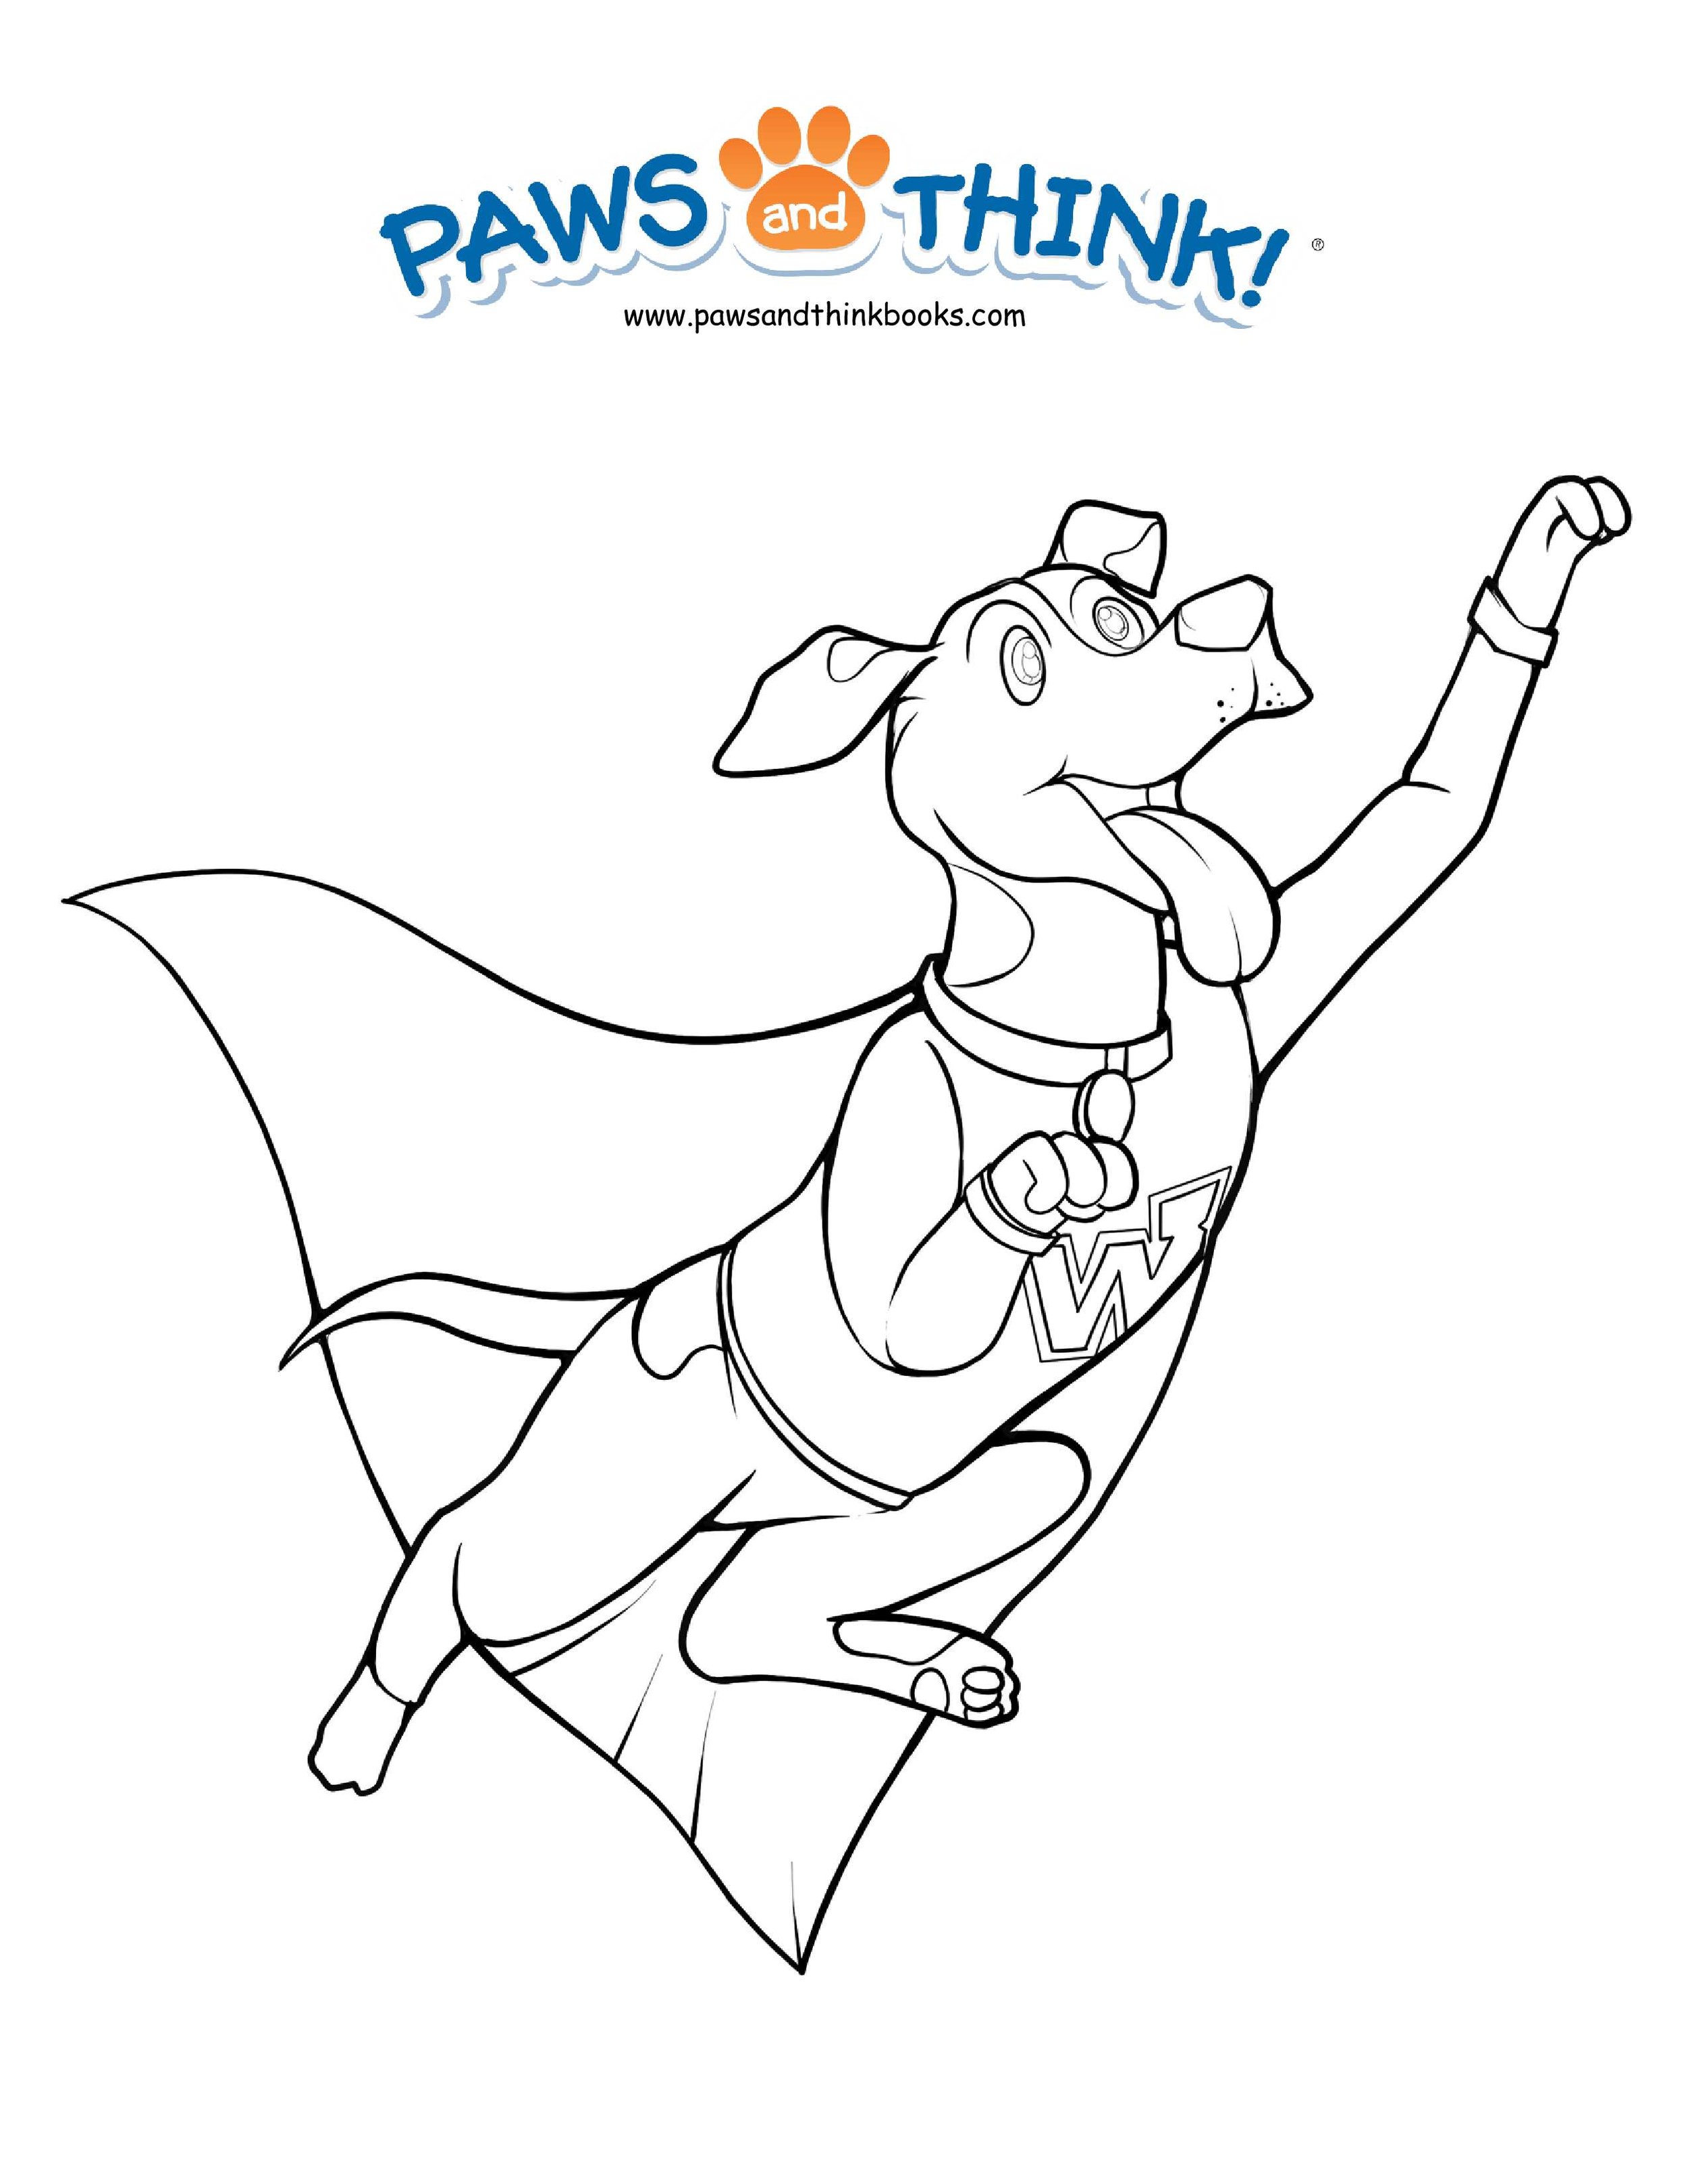 Coloring page 5.jpg